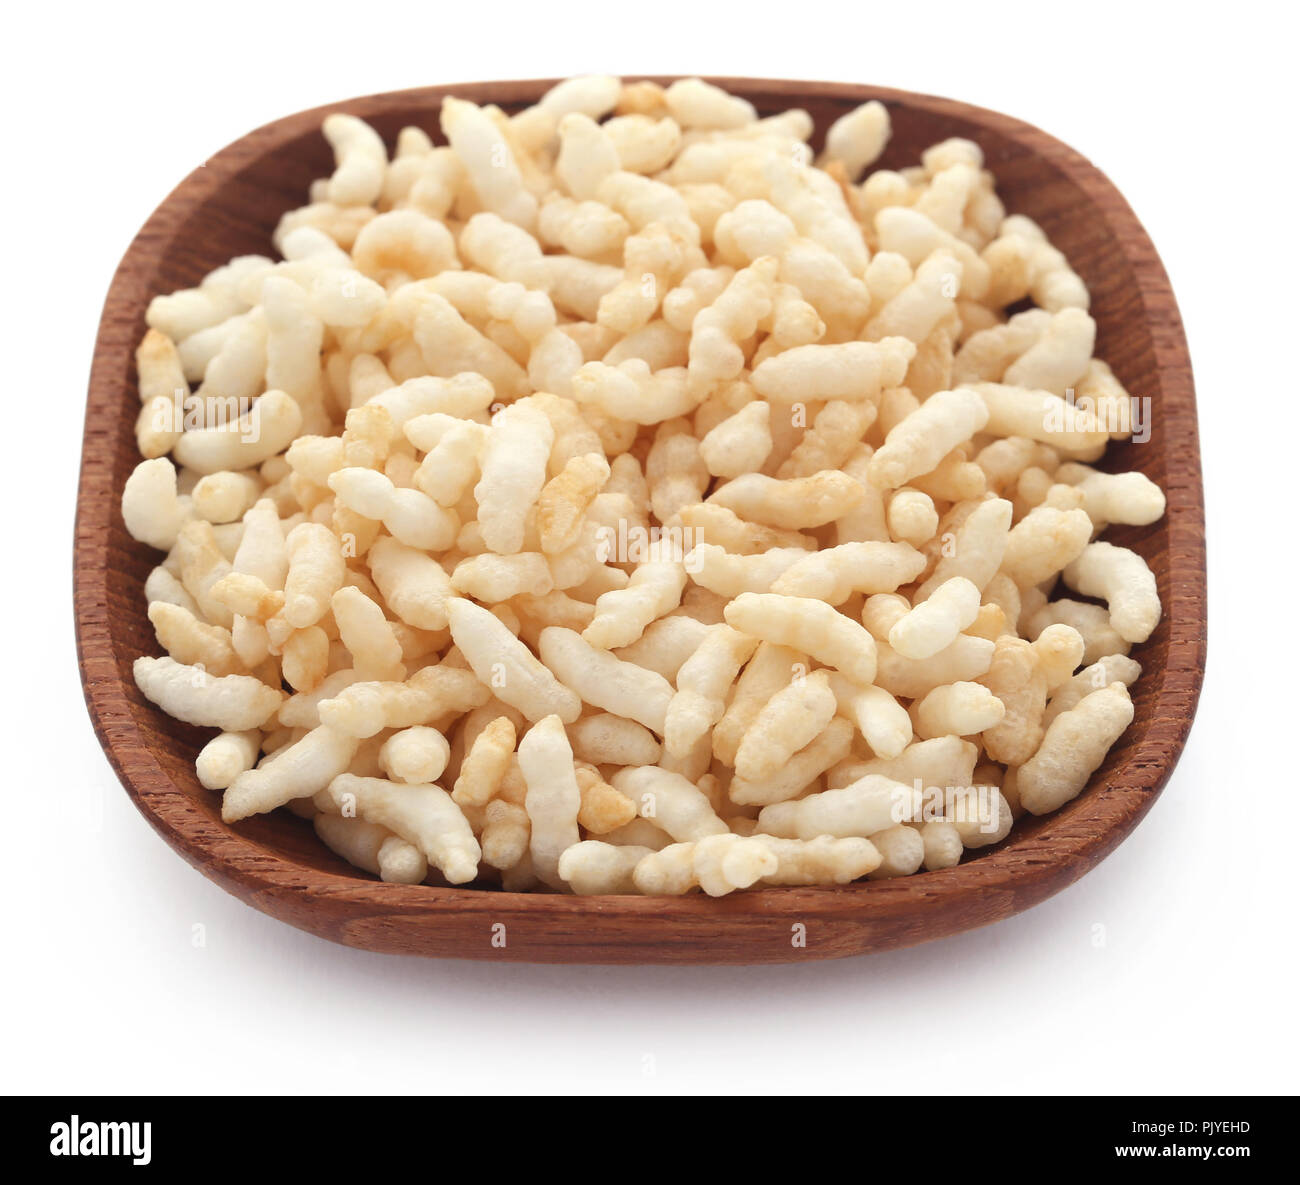 Puffed rice in a bowl over white background Stock Photo